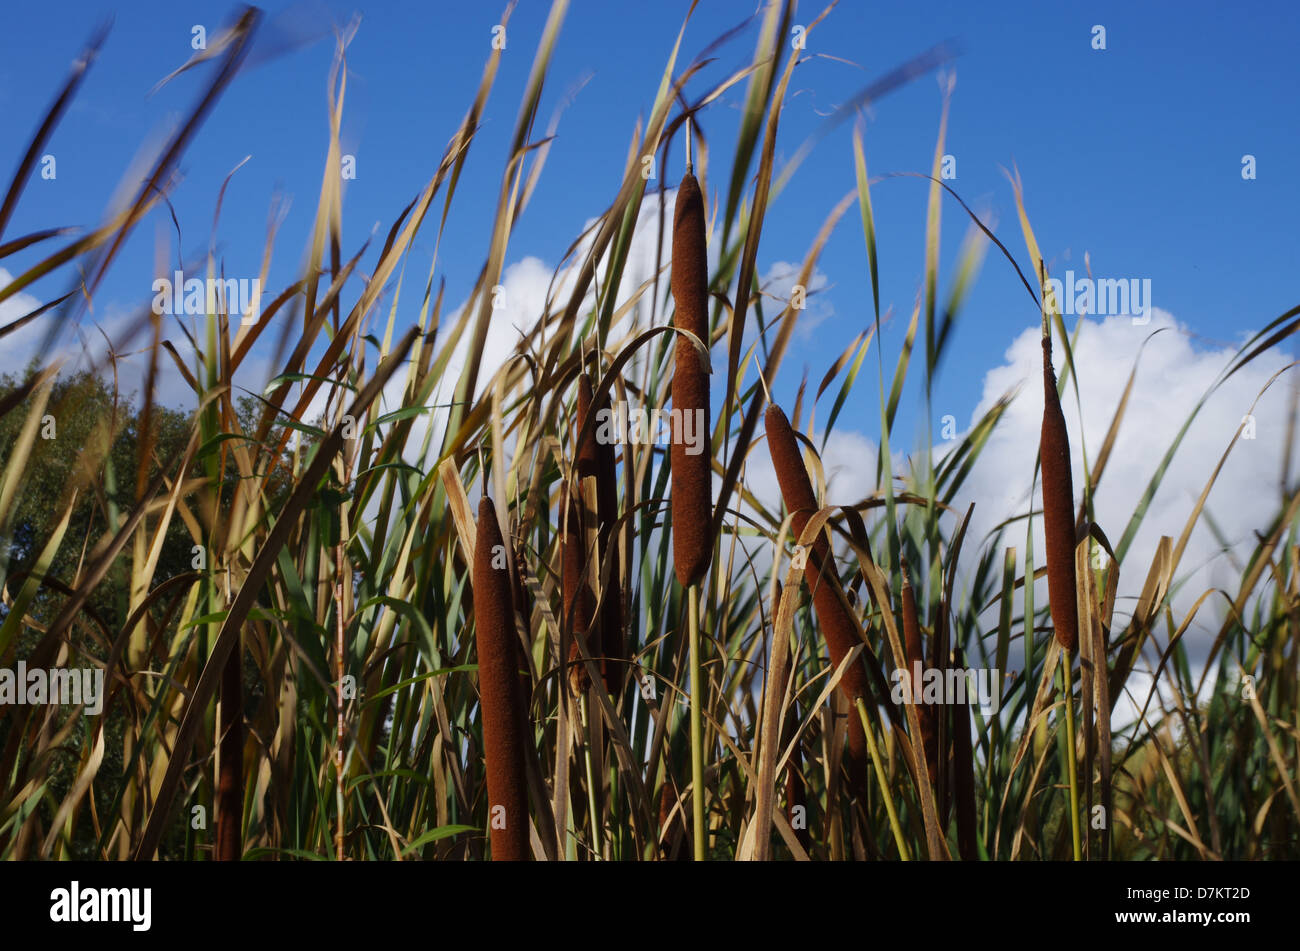 Bulrushes blowing in the breeze on a summer's days. Stock Photo